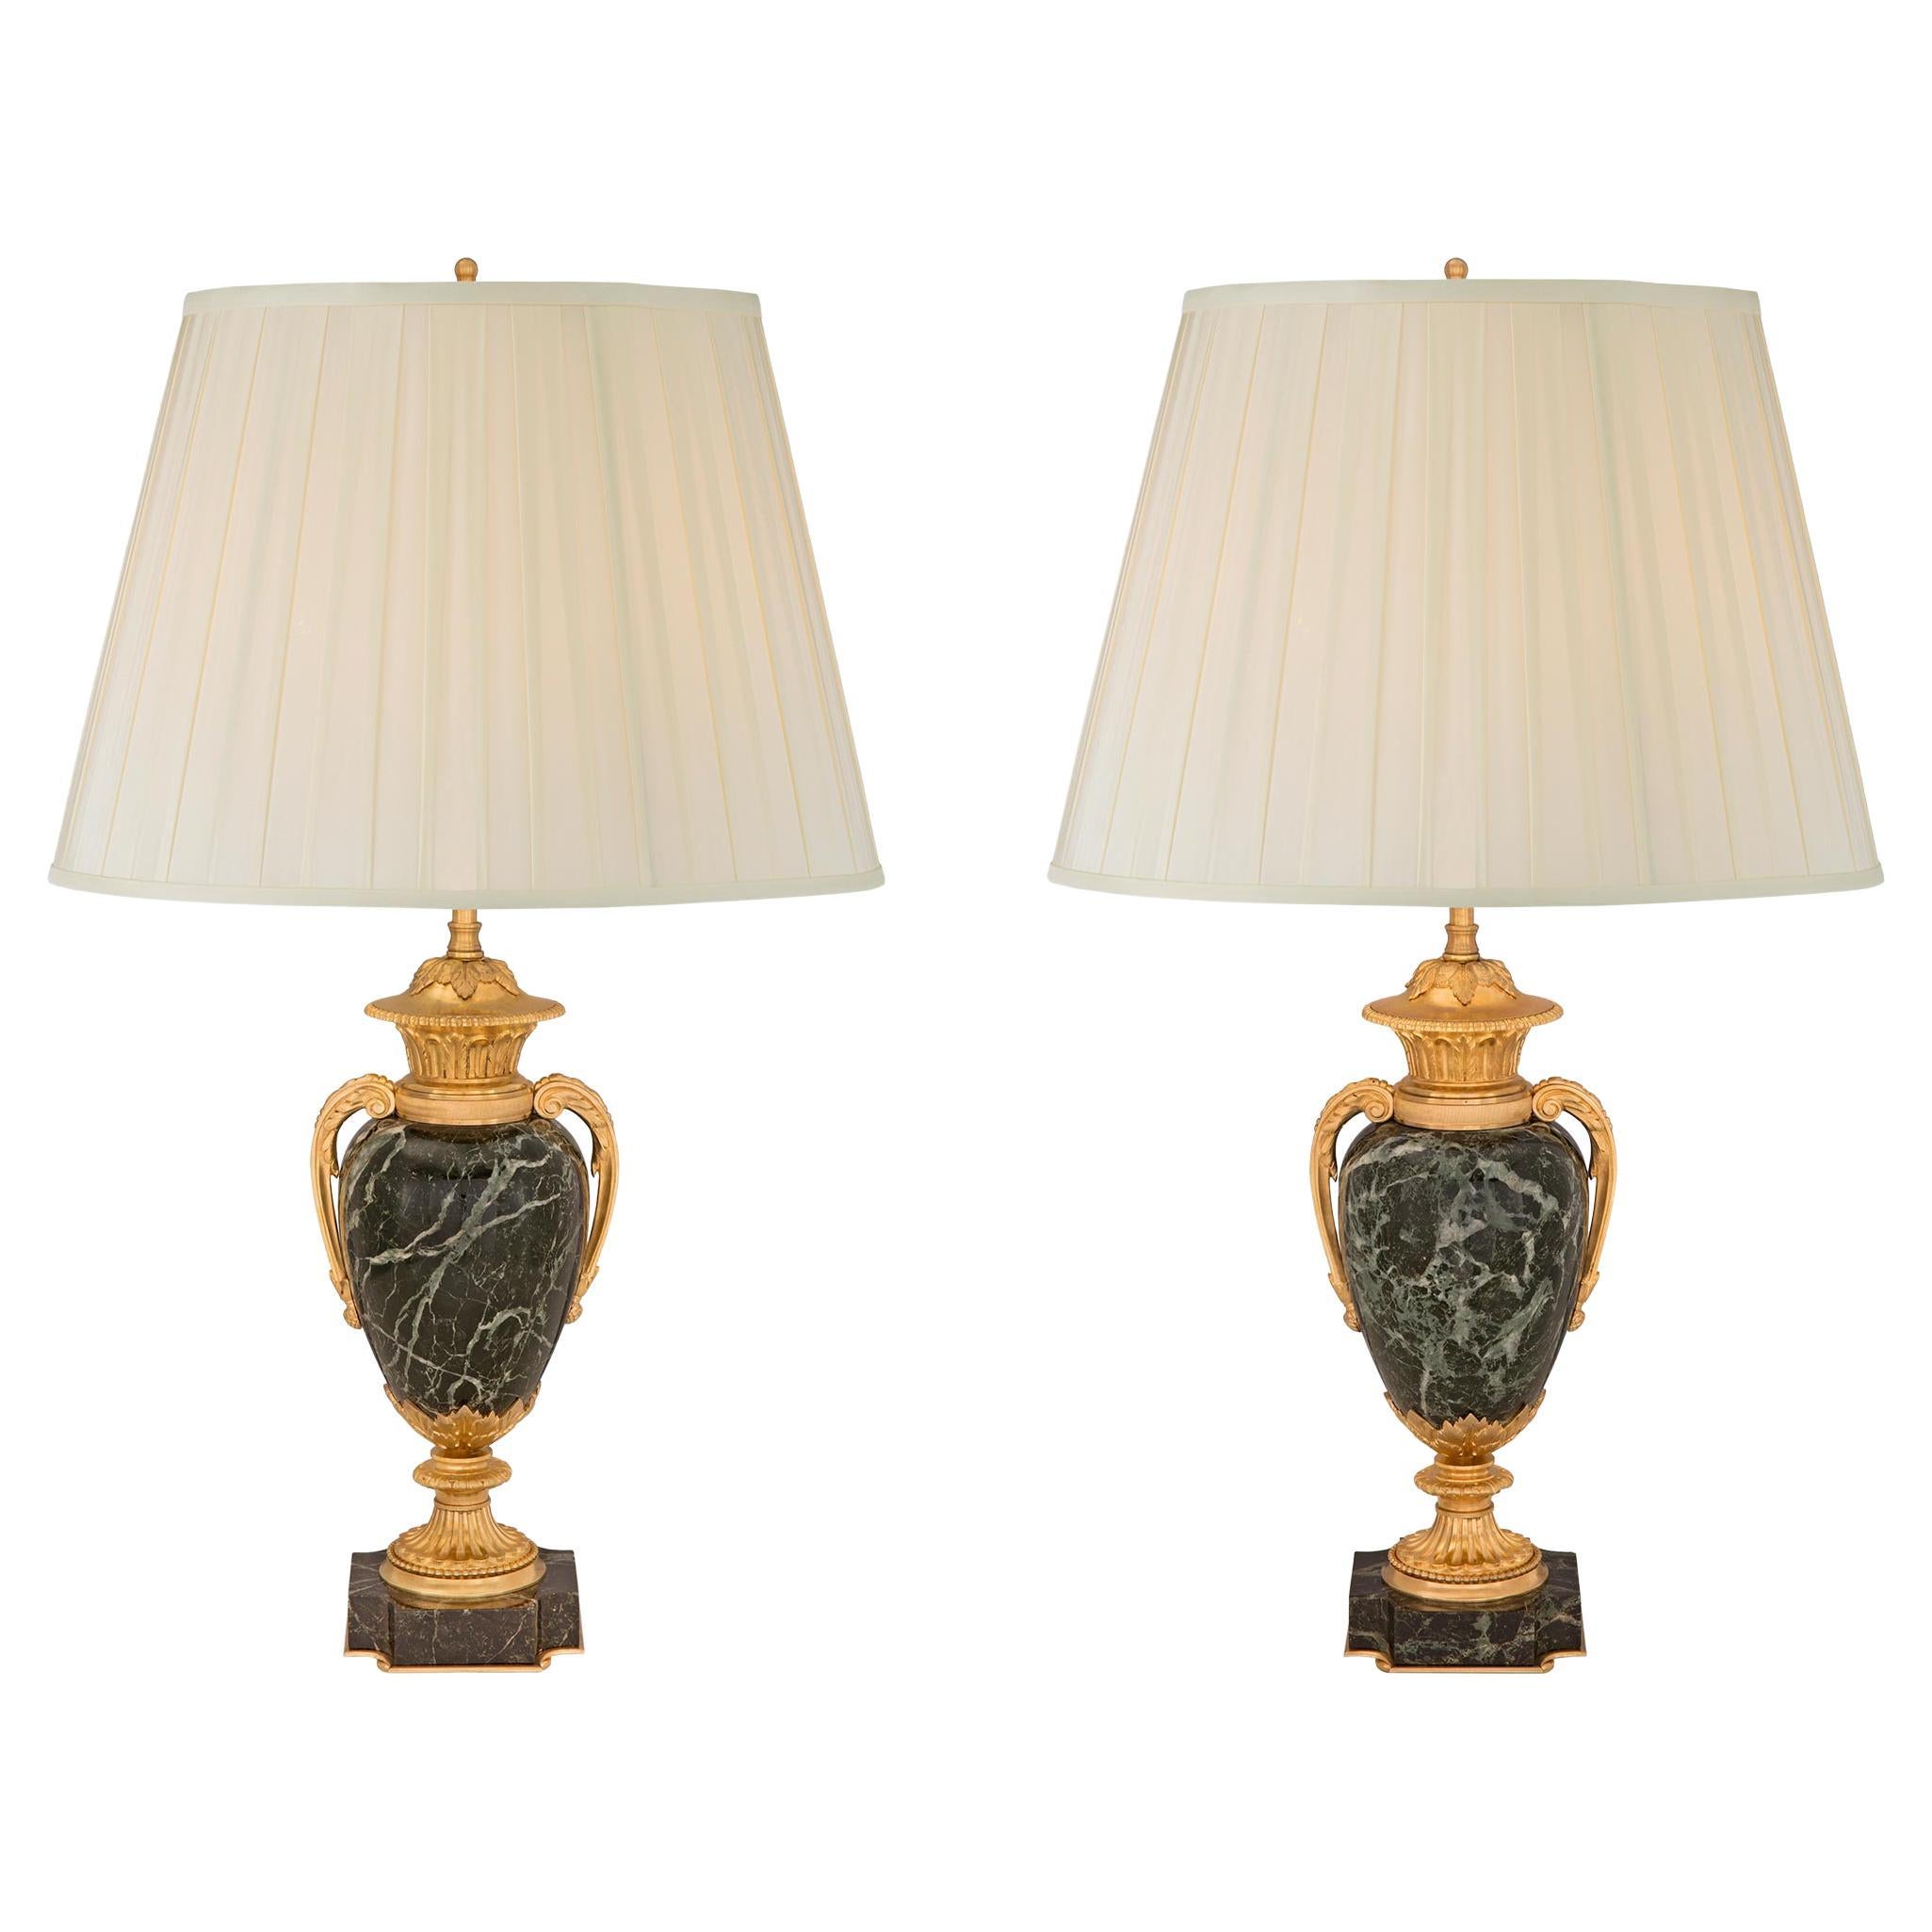 Pair of French 19th Century Louis XVI Style Marble and Ormolu Lamps For Sale